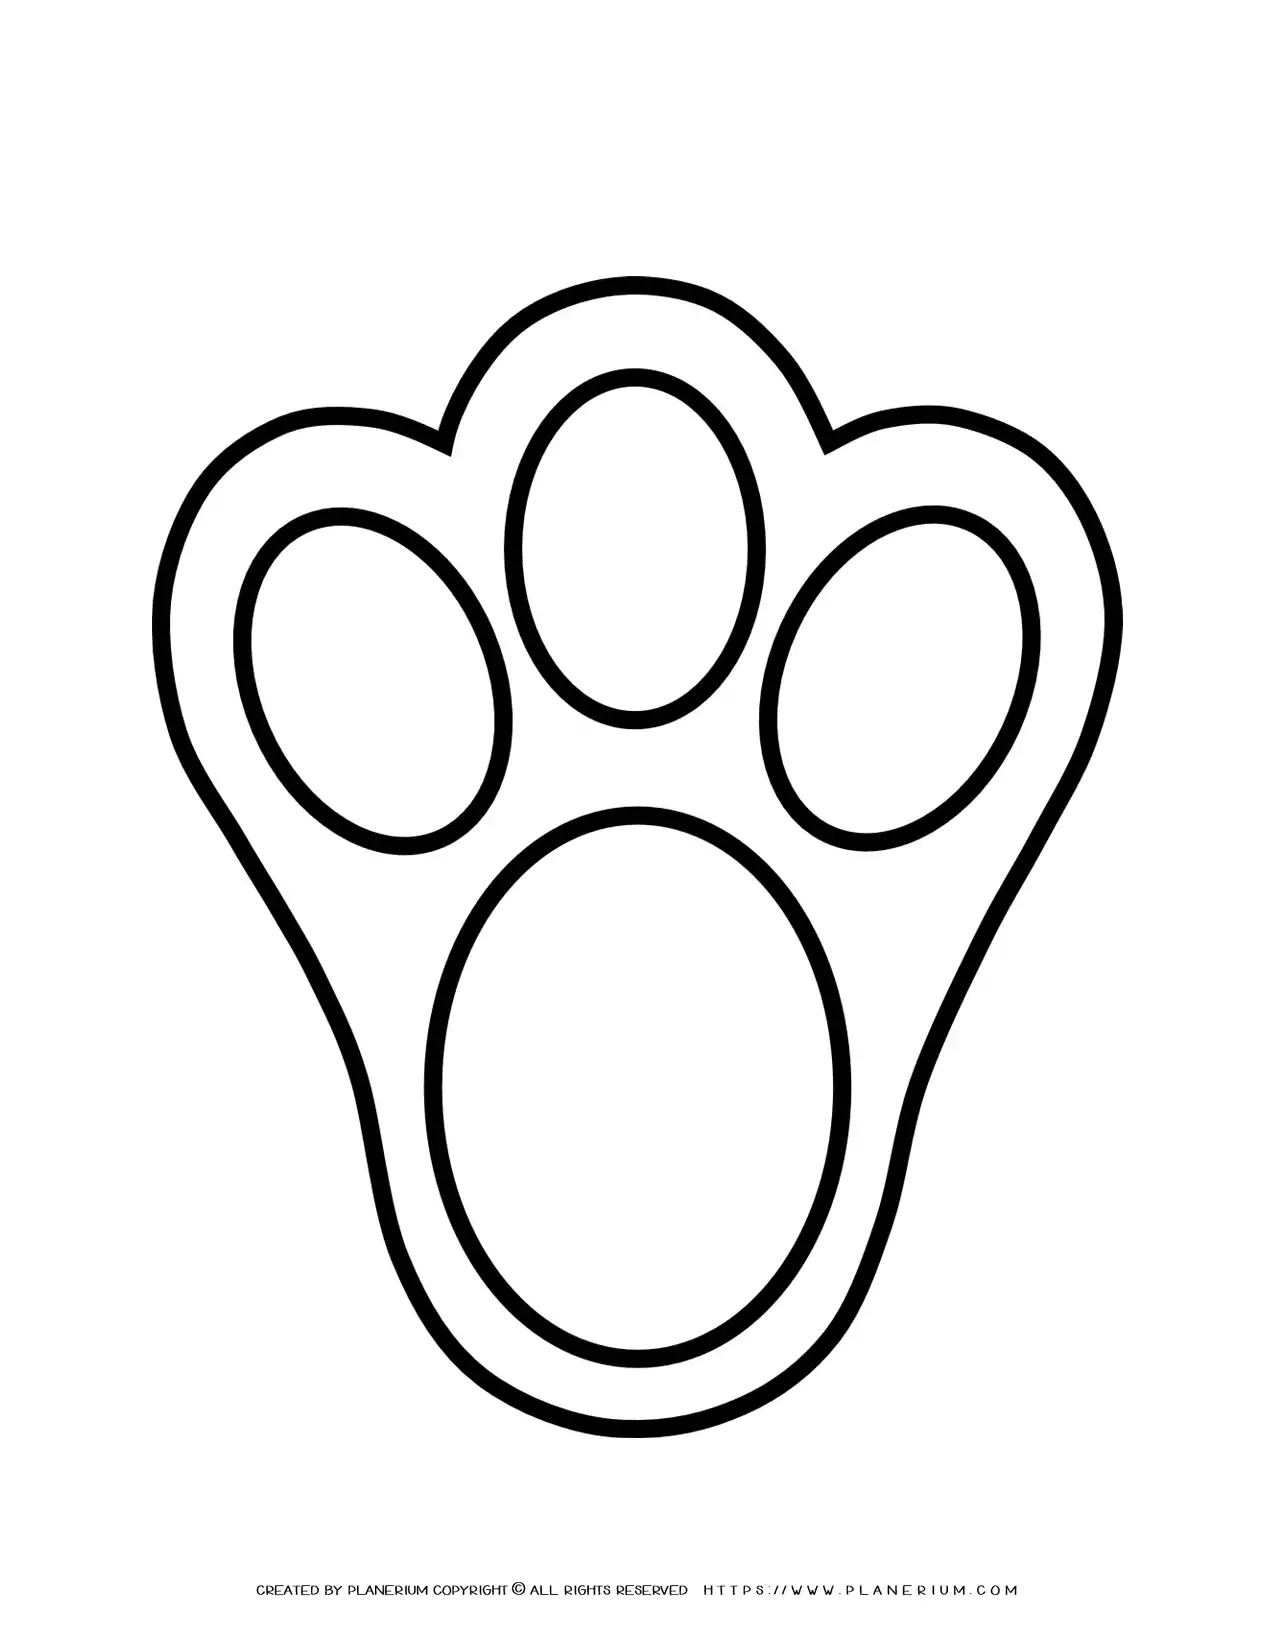 Printable bunny footprint template for crafts and activities